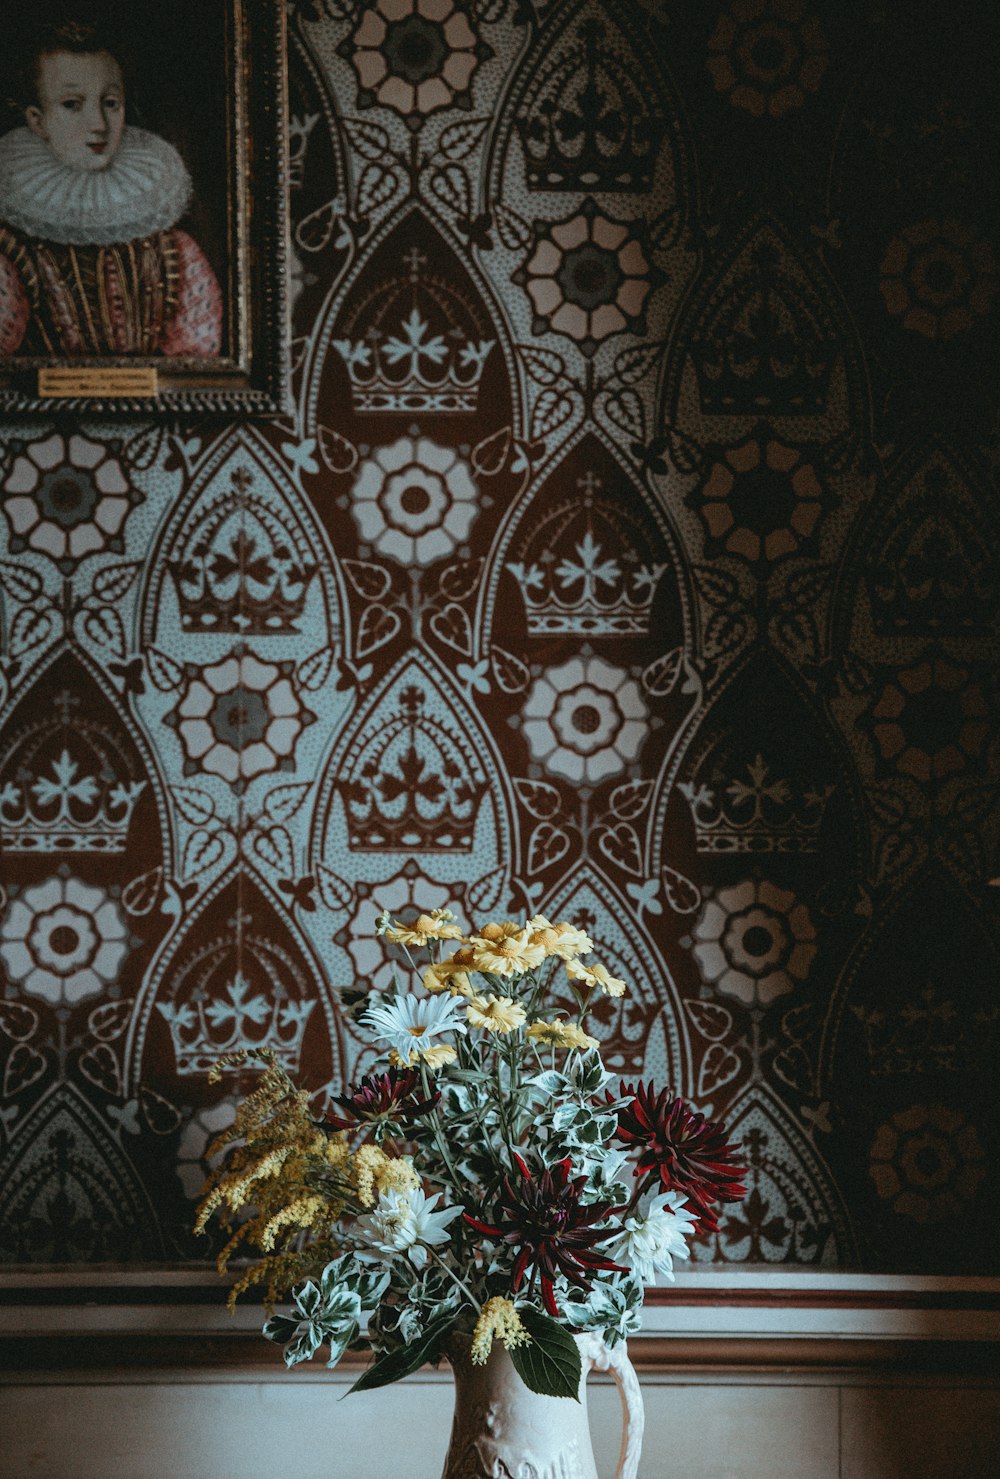 yellow, red, and white flowers in vase beside wall